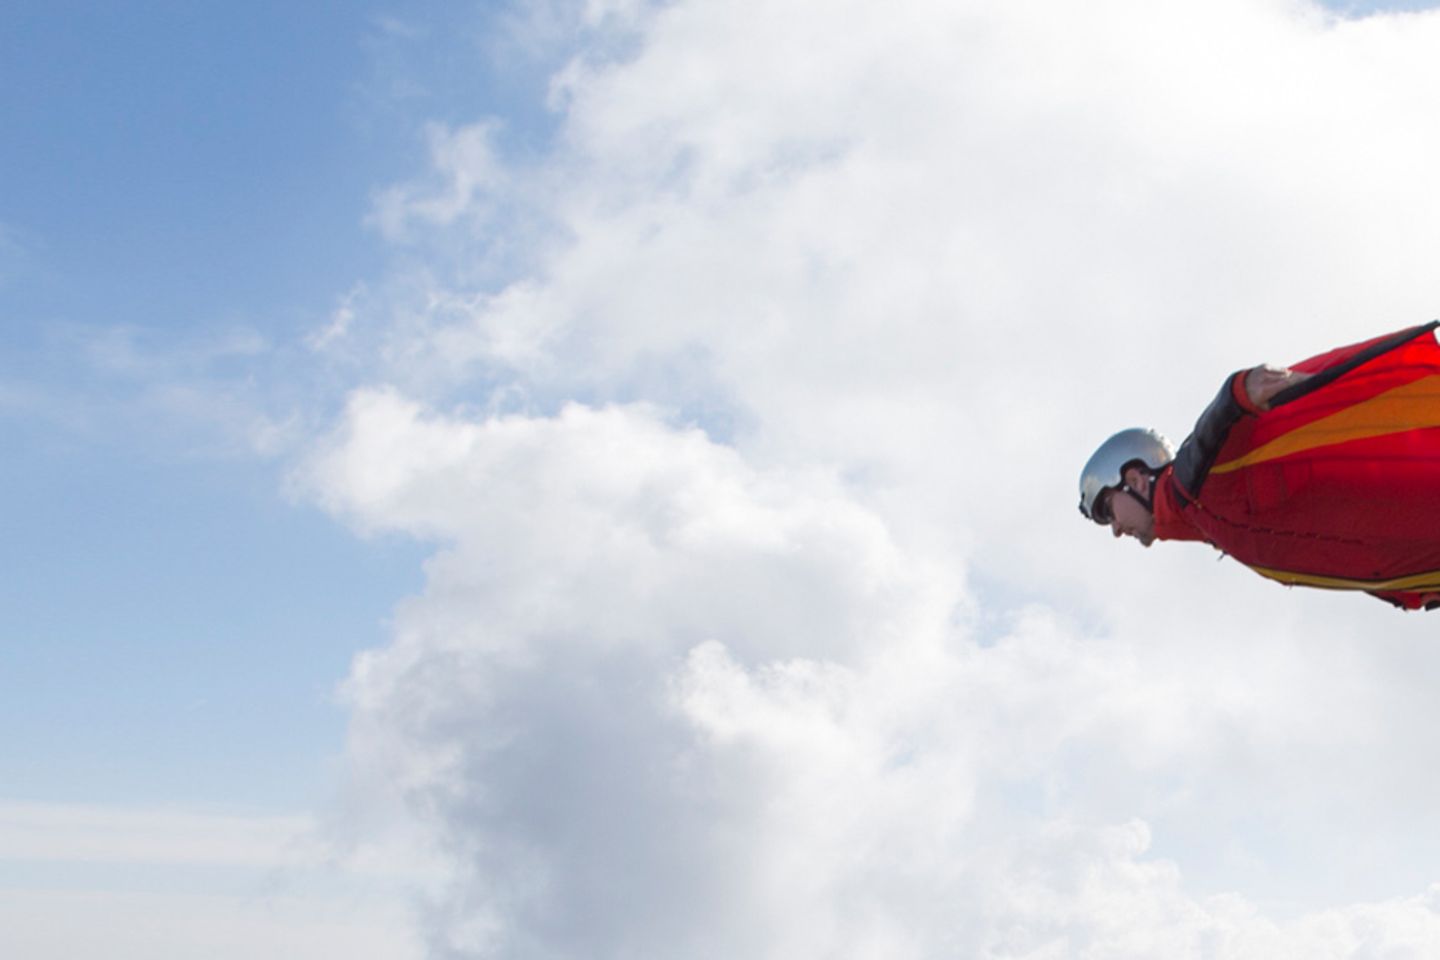 Wingsuit Jumper jumps from rocks with red beacon.